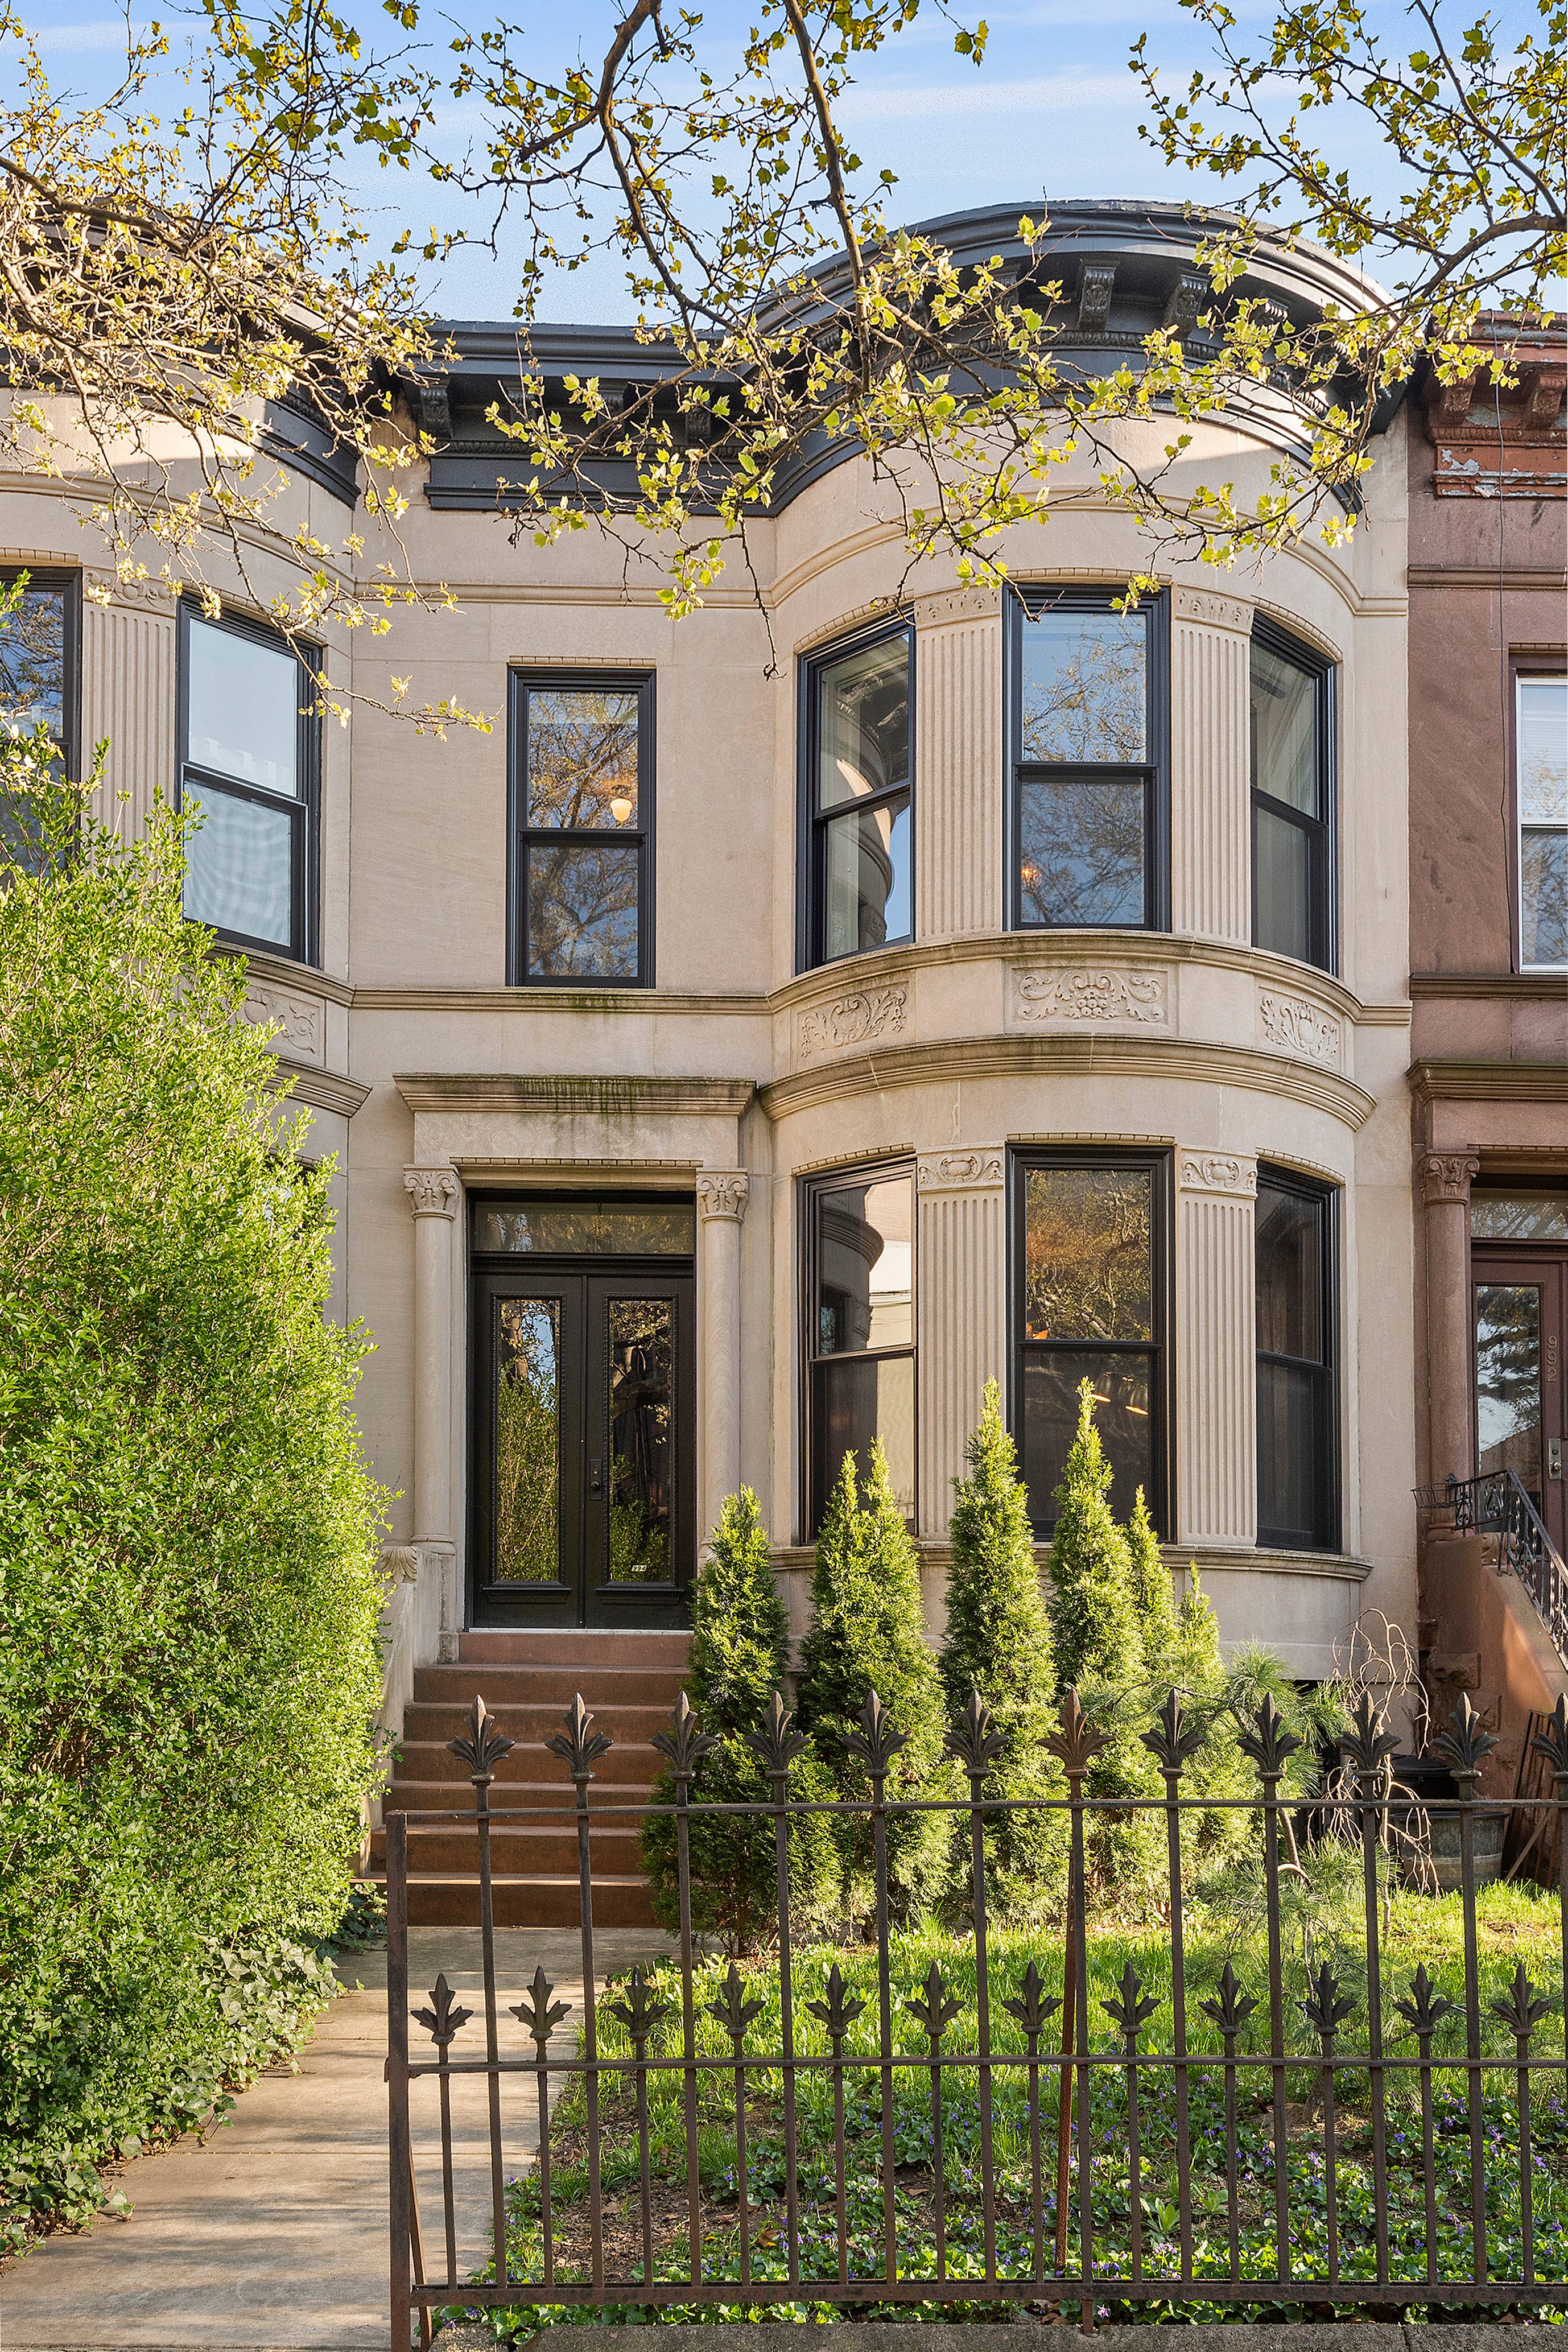 Amazing opportunity to own a completely renovated Renaisance Revival home on St Johns Place in exciting Crown Heights !